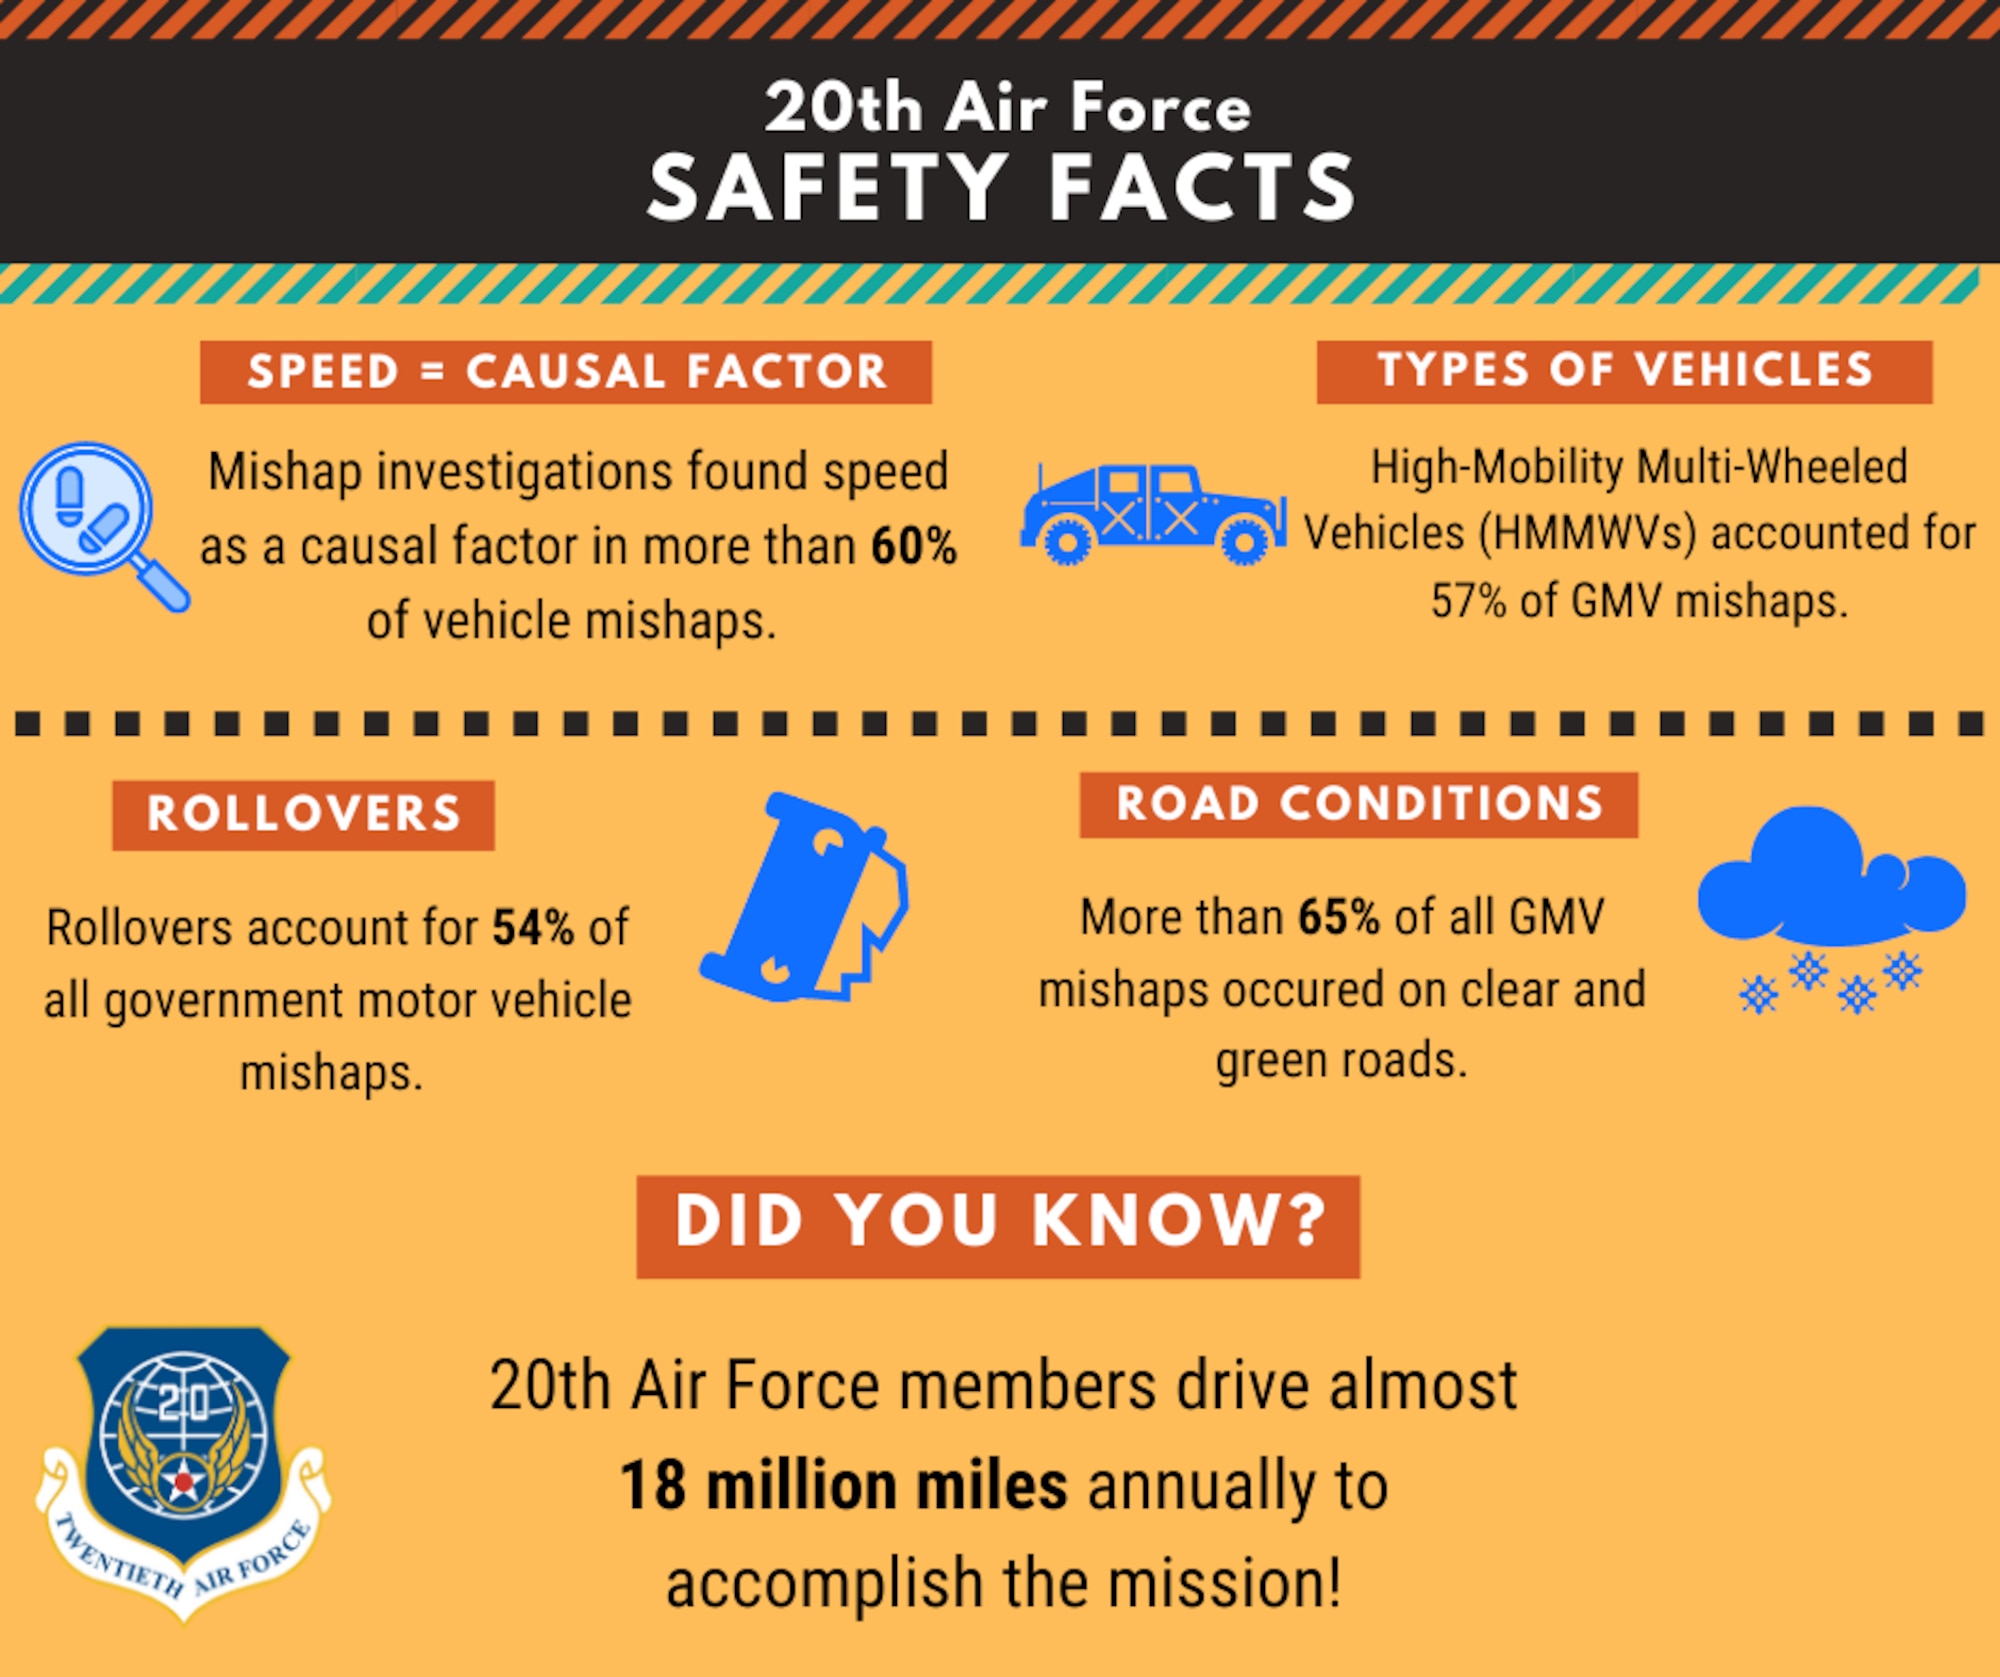 20th Air Force safety facts. (U.S. Air Force graphic by Capt Ieva Bytautaite)